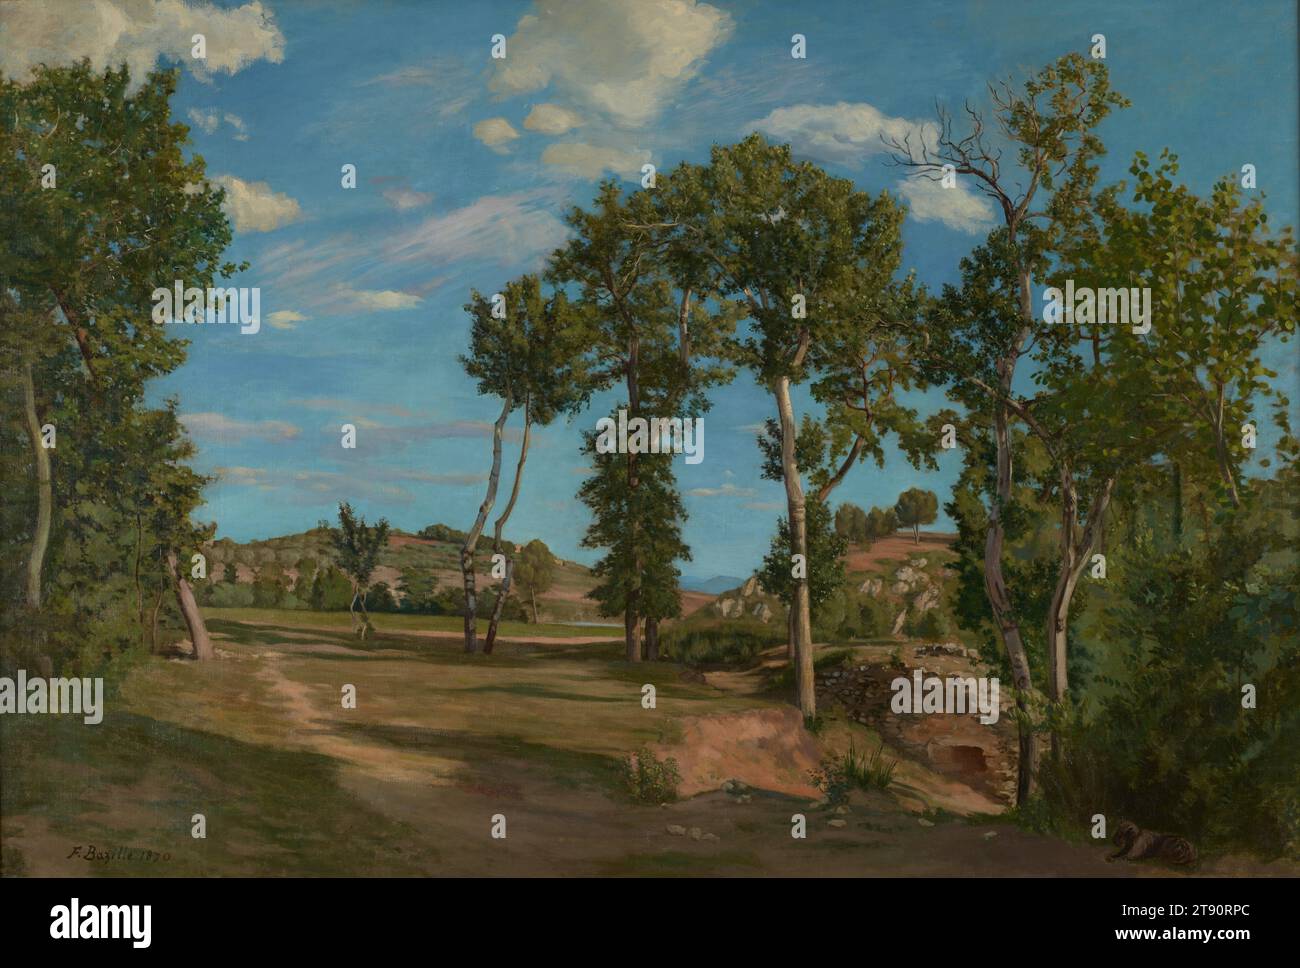 Landscape by the Lez River, 1870, Jean-Frédéric Bazille, French, 1841–1870, 54 x 79 in. (137.16 x 200.66 cm) (sight)66 1/4 x 91 1/2 x 4 in. (168.28 x 232.41 x 10.16 cm) (outer frame), Oil on canvas, France, 19th century, In June 1870, Bazille informed his father 'I have just about finished a large landscape (eclogue).' Two weeks later he enlisted in the French army to serve during the Franco–Prussian War and died in combat near Orléans in November. Landscape by the River Lez is the 'large landscape' mentioned in Bazille’s correspondence, and his specific reference to it as an 'eclogue' Stock Photo